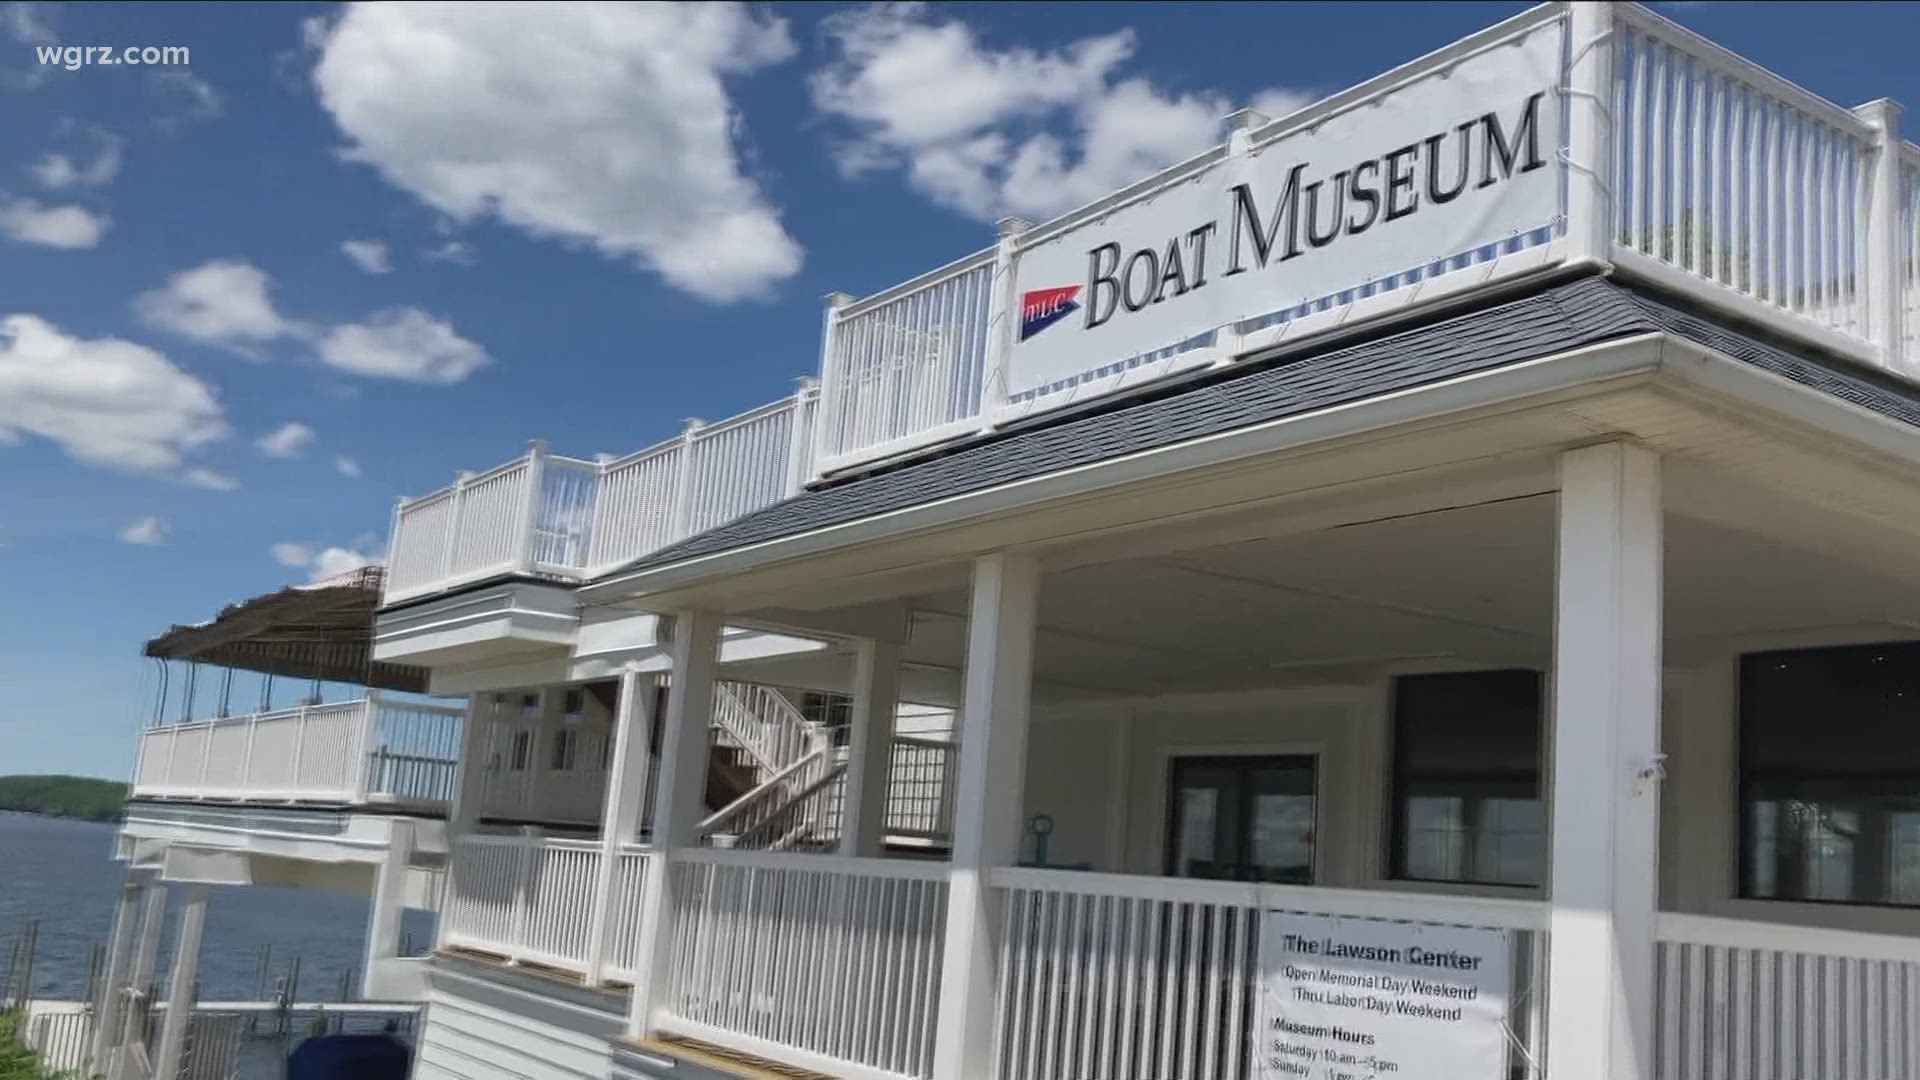 Lawson Center: boat museum and event hall